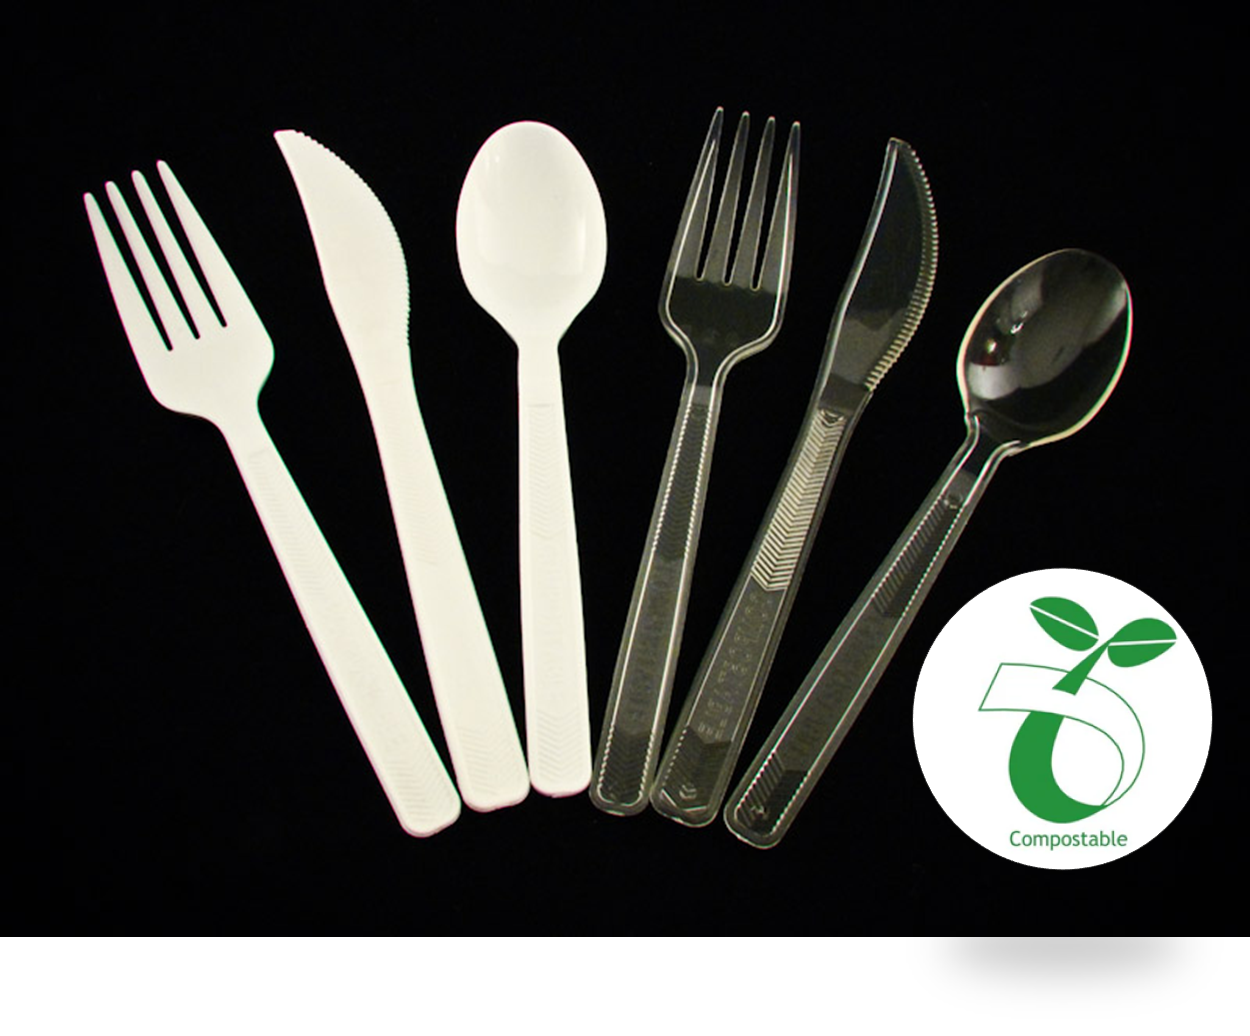 Designed for cold applications, BioSelect® medium-weight cutlery forks are are made with Ingeo™ corn resins that are 100% biodegradable, 100% compostable and available in white or clear